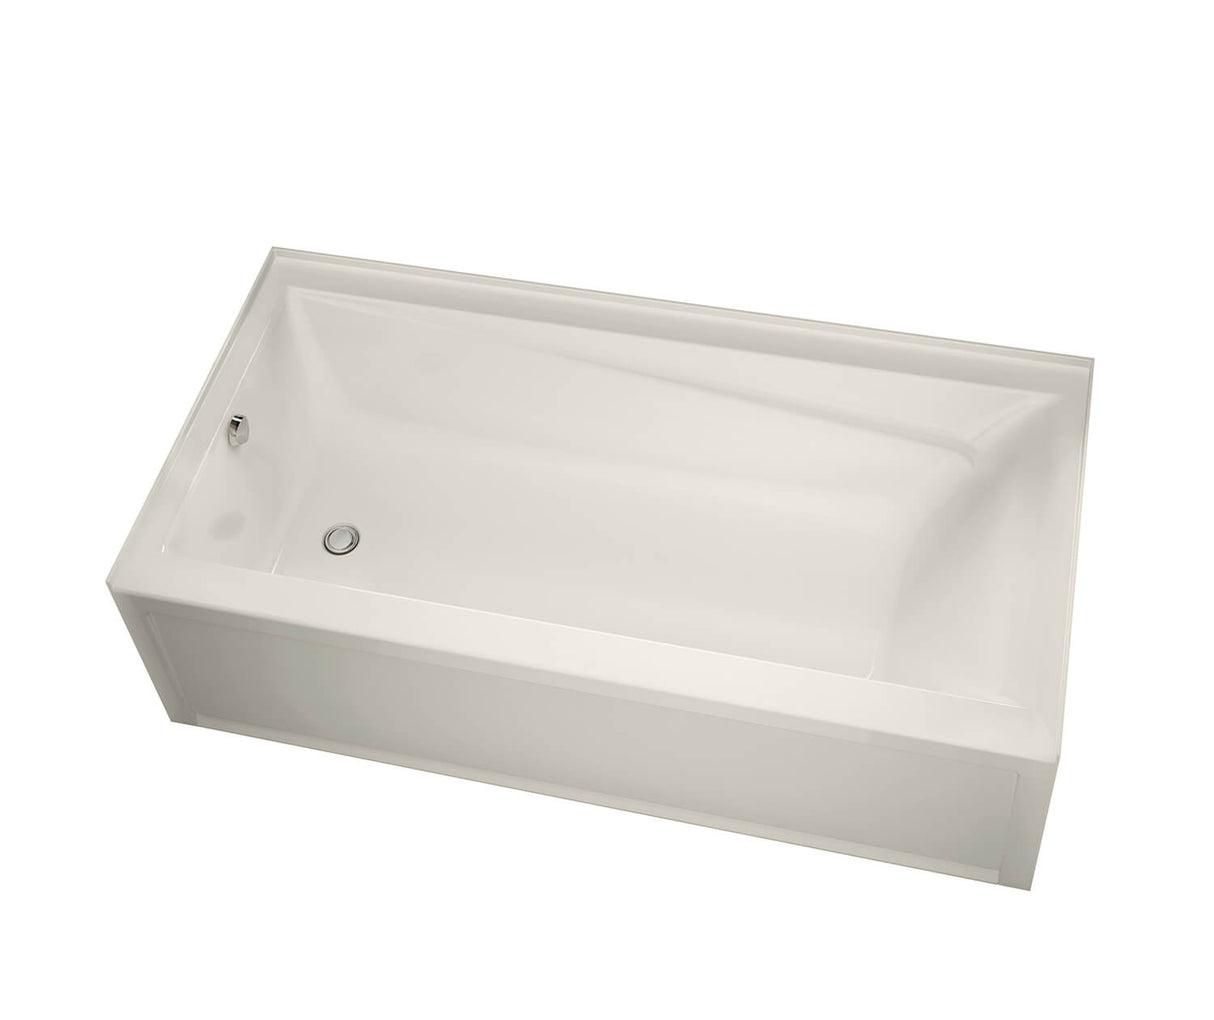 MAAX 105454-091-007-103 New Town 6030 IFS Acrylic Alcove Right-Hand Drain 10 Microjets Bathtub in Biscuit